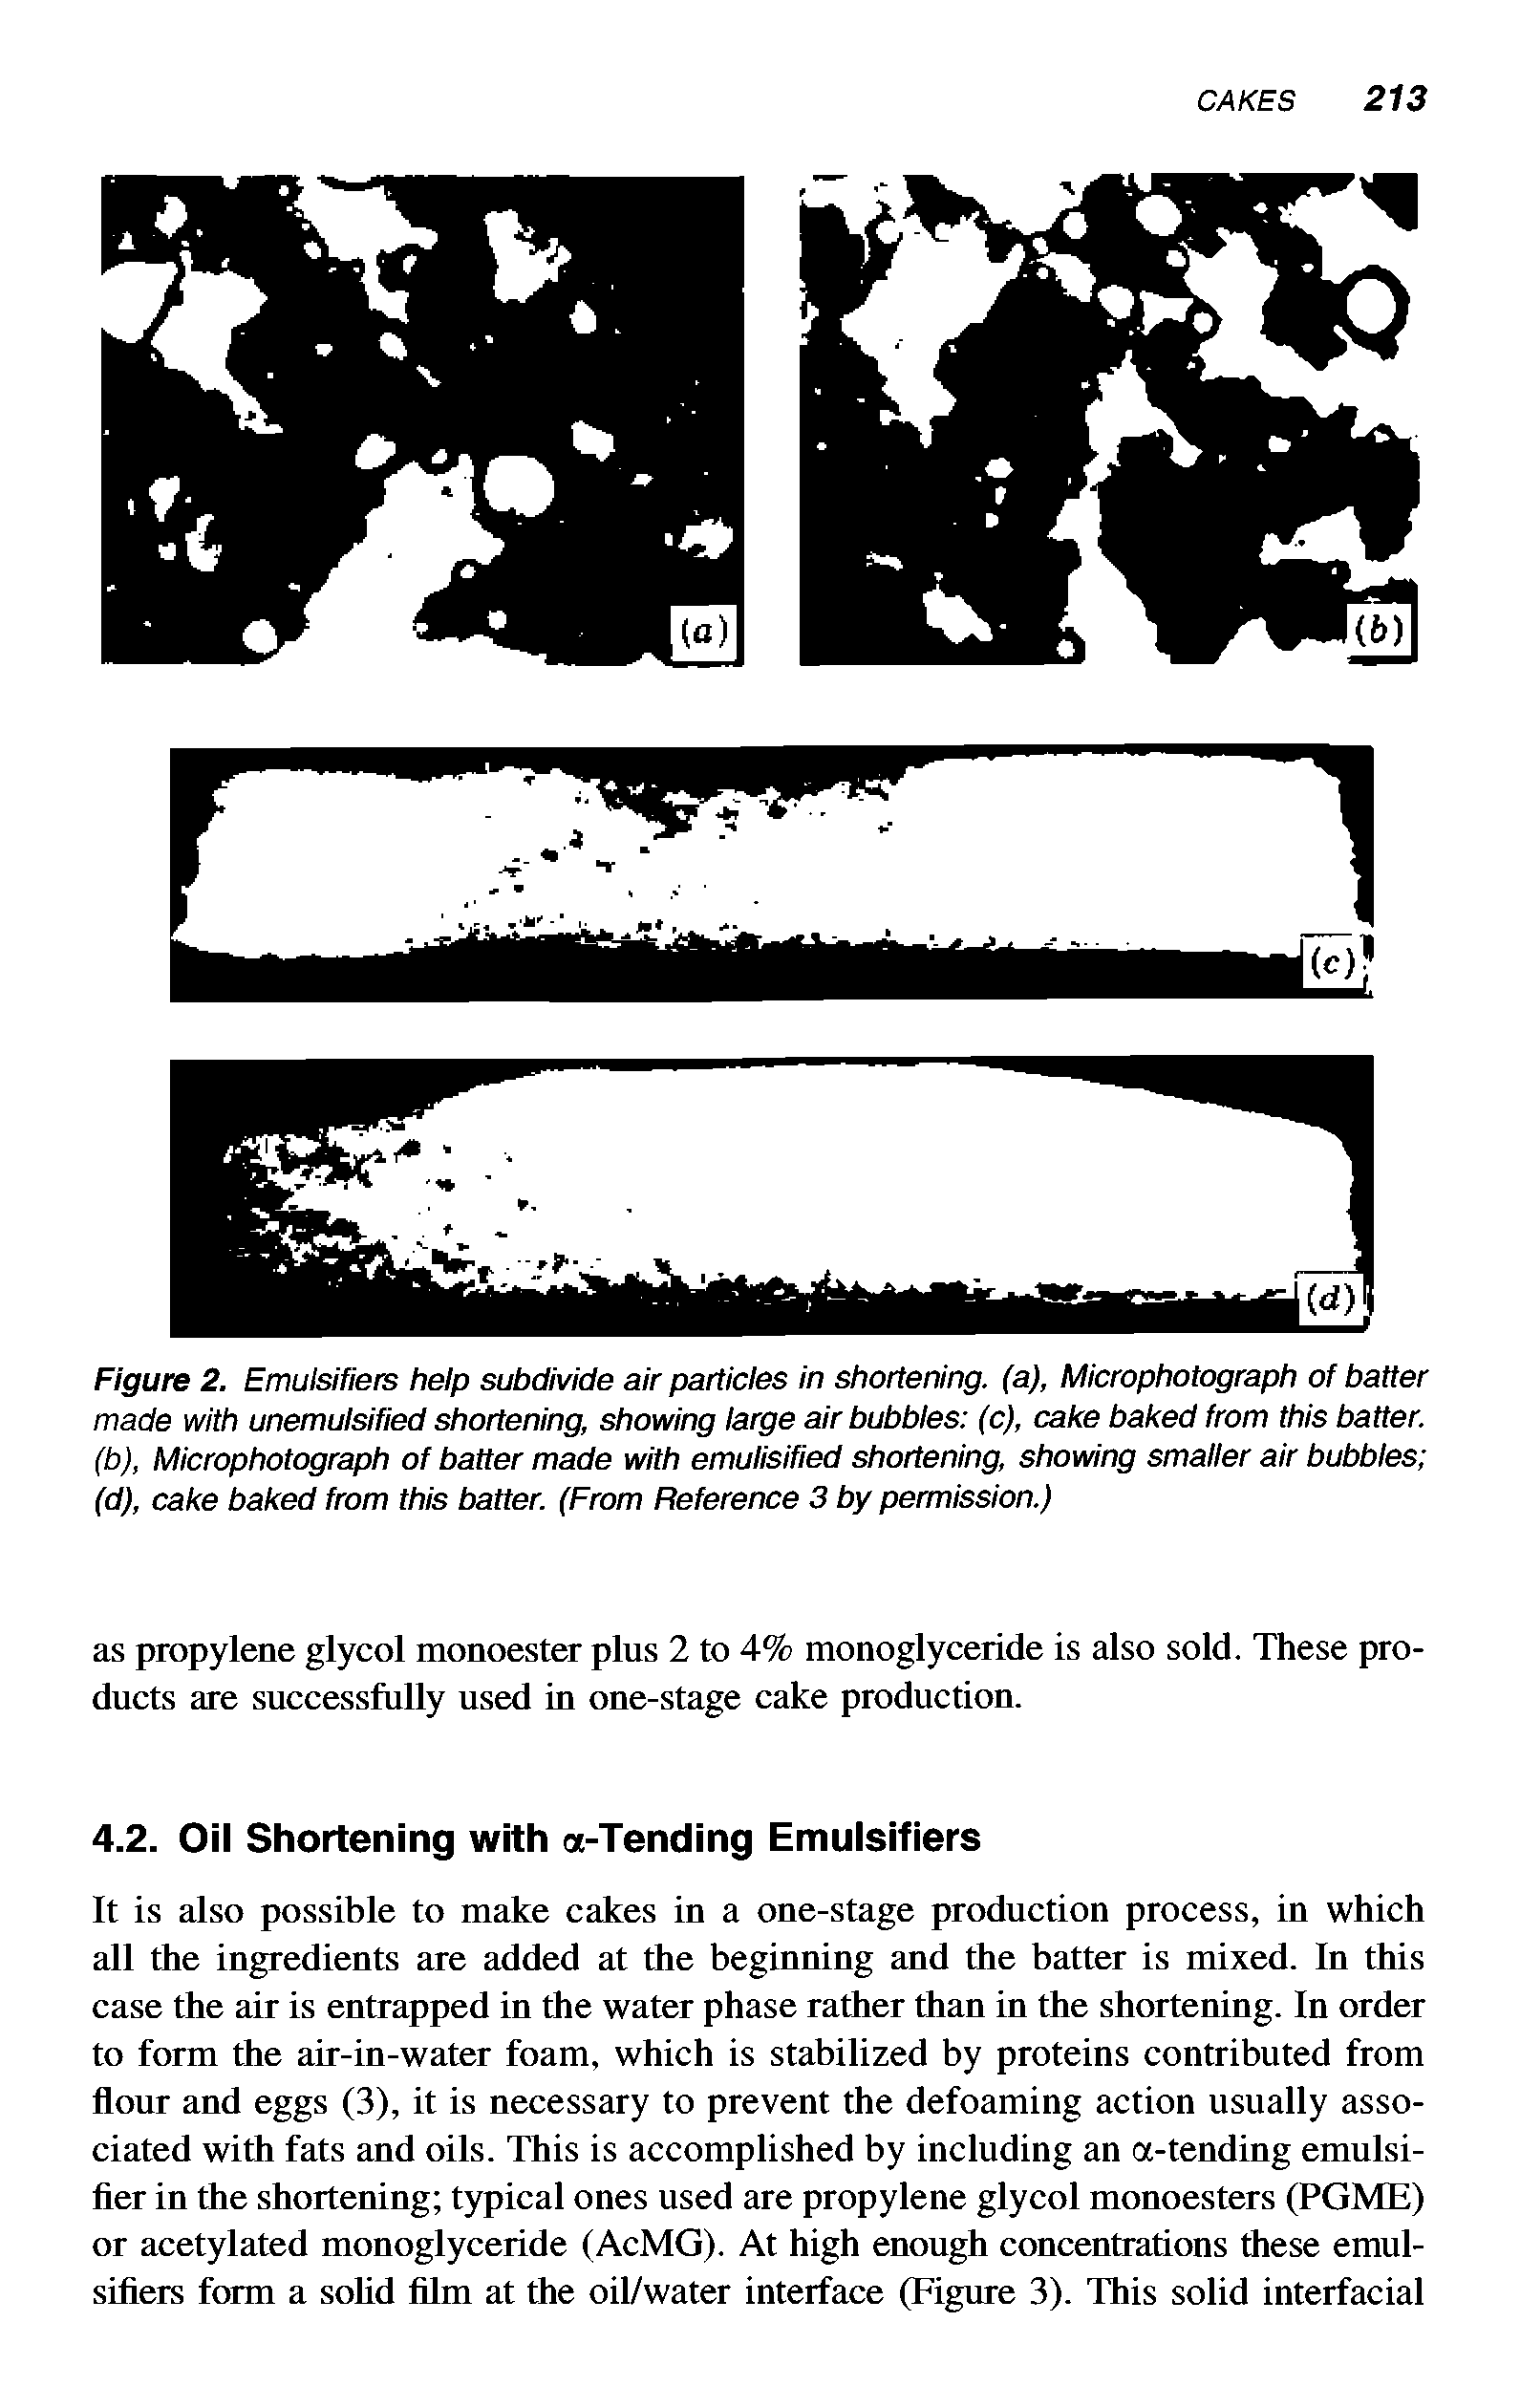 Figure 2. Emulsifiers heip subdivide air particies in shortening, (a), Microphotograph of batter made with unemulsified shortening, showing large air bubbles (c), cake baked from this batter, (b), Microphotograph of batter made with emuiisified shortening, showing smaller air bubbles (d), cake baked from this batter. (From Reference 3 by permission.)...